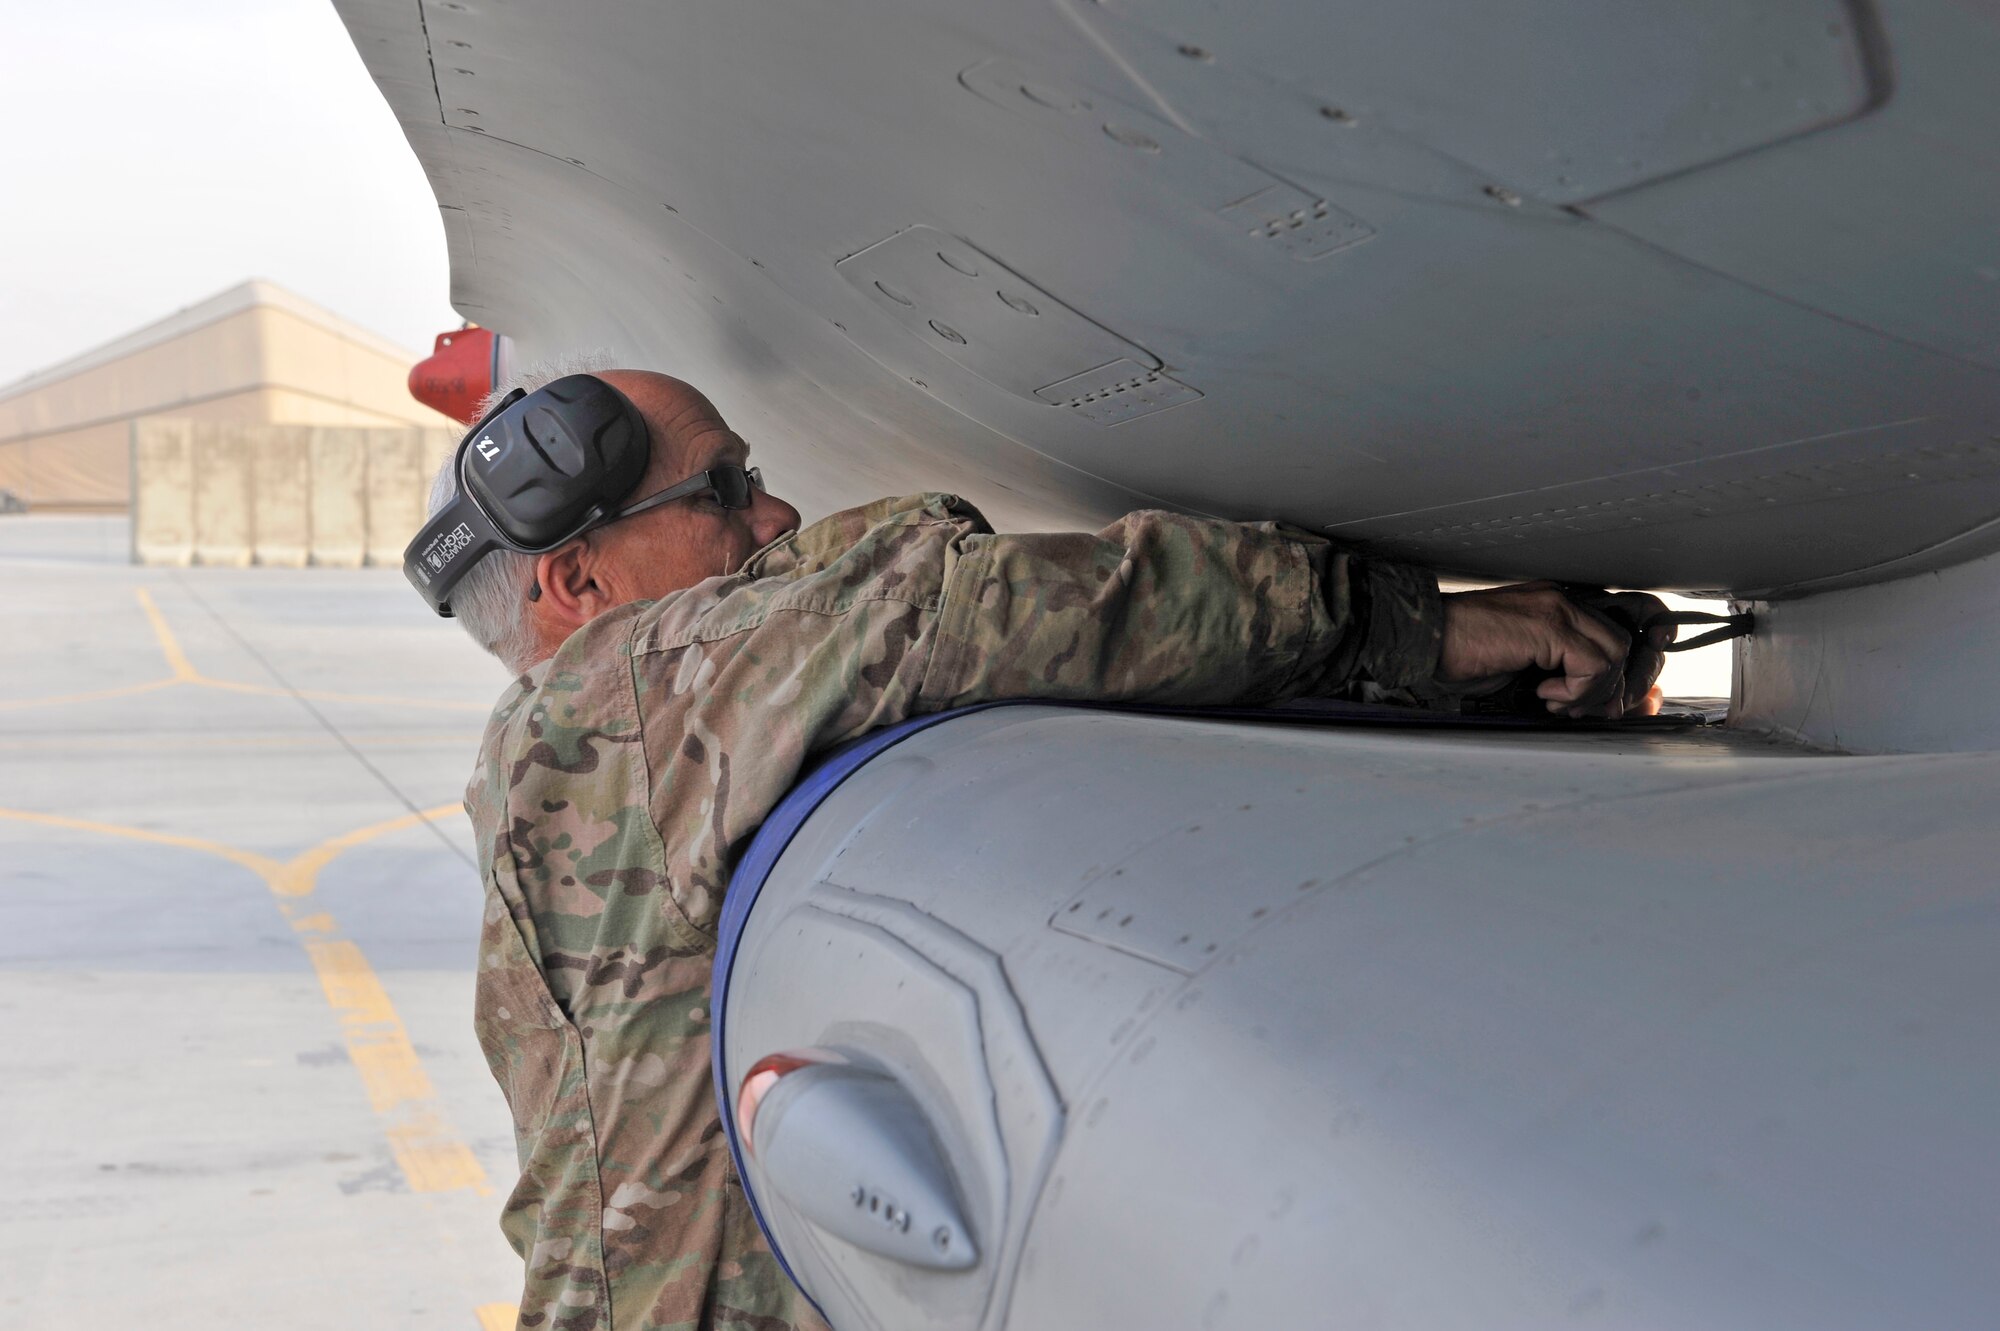 U.S. Air Force Master Sgt. Doyle Easterling reattaches the engine intake cover after an F-16 engine test run at Bagram Airfield, Afghanistan, Jan. 20, 2014. Easterling is deployed out of Carswell Joint Reserve Base in Fort Worth, Texas to Bagram, and will be retiring this year after 36 years of military service. (U.S. Air Force photo by Senior Master Sgt. Gary J. Rihn/Released)